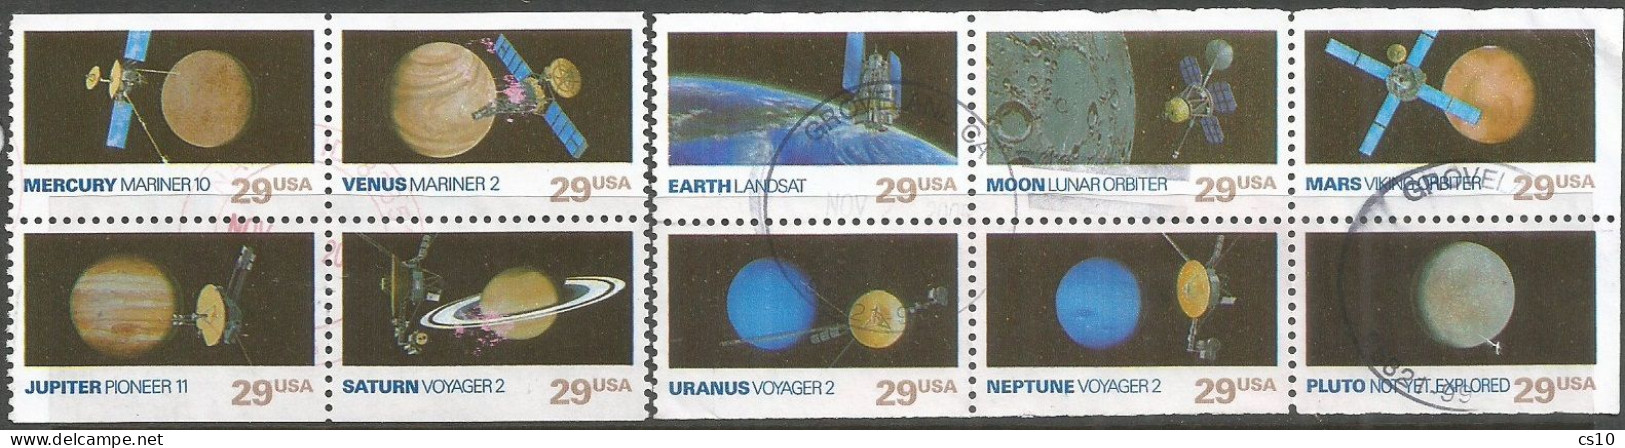 USA 1991 Space Exploration Cpl10v Set In #2 Blocks From Booklet Of 4+6pcs In VFU Condition REALLY USED - United States